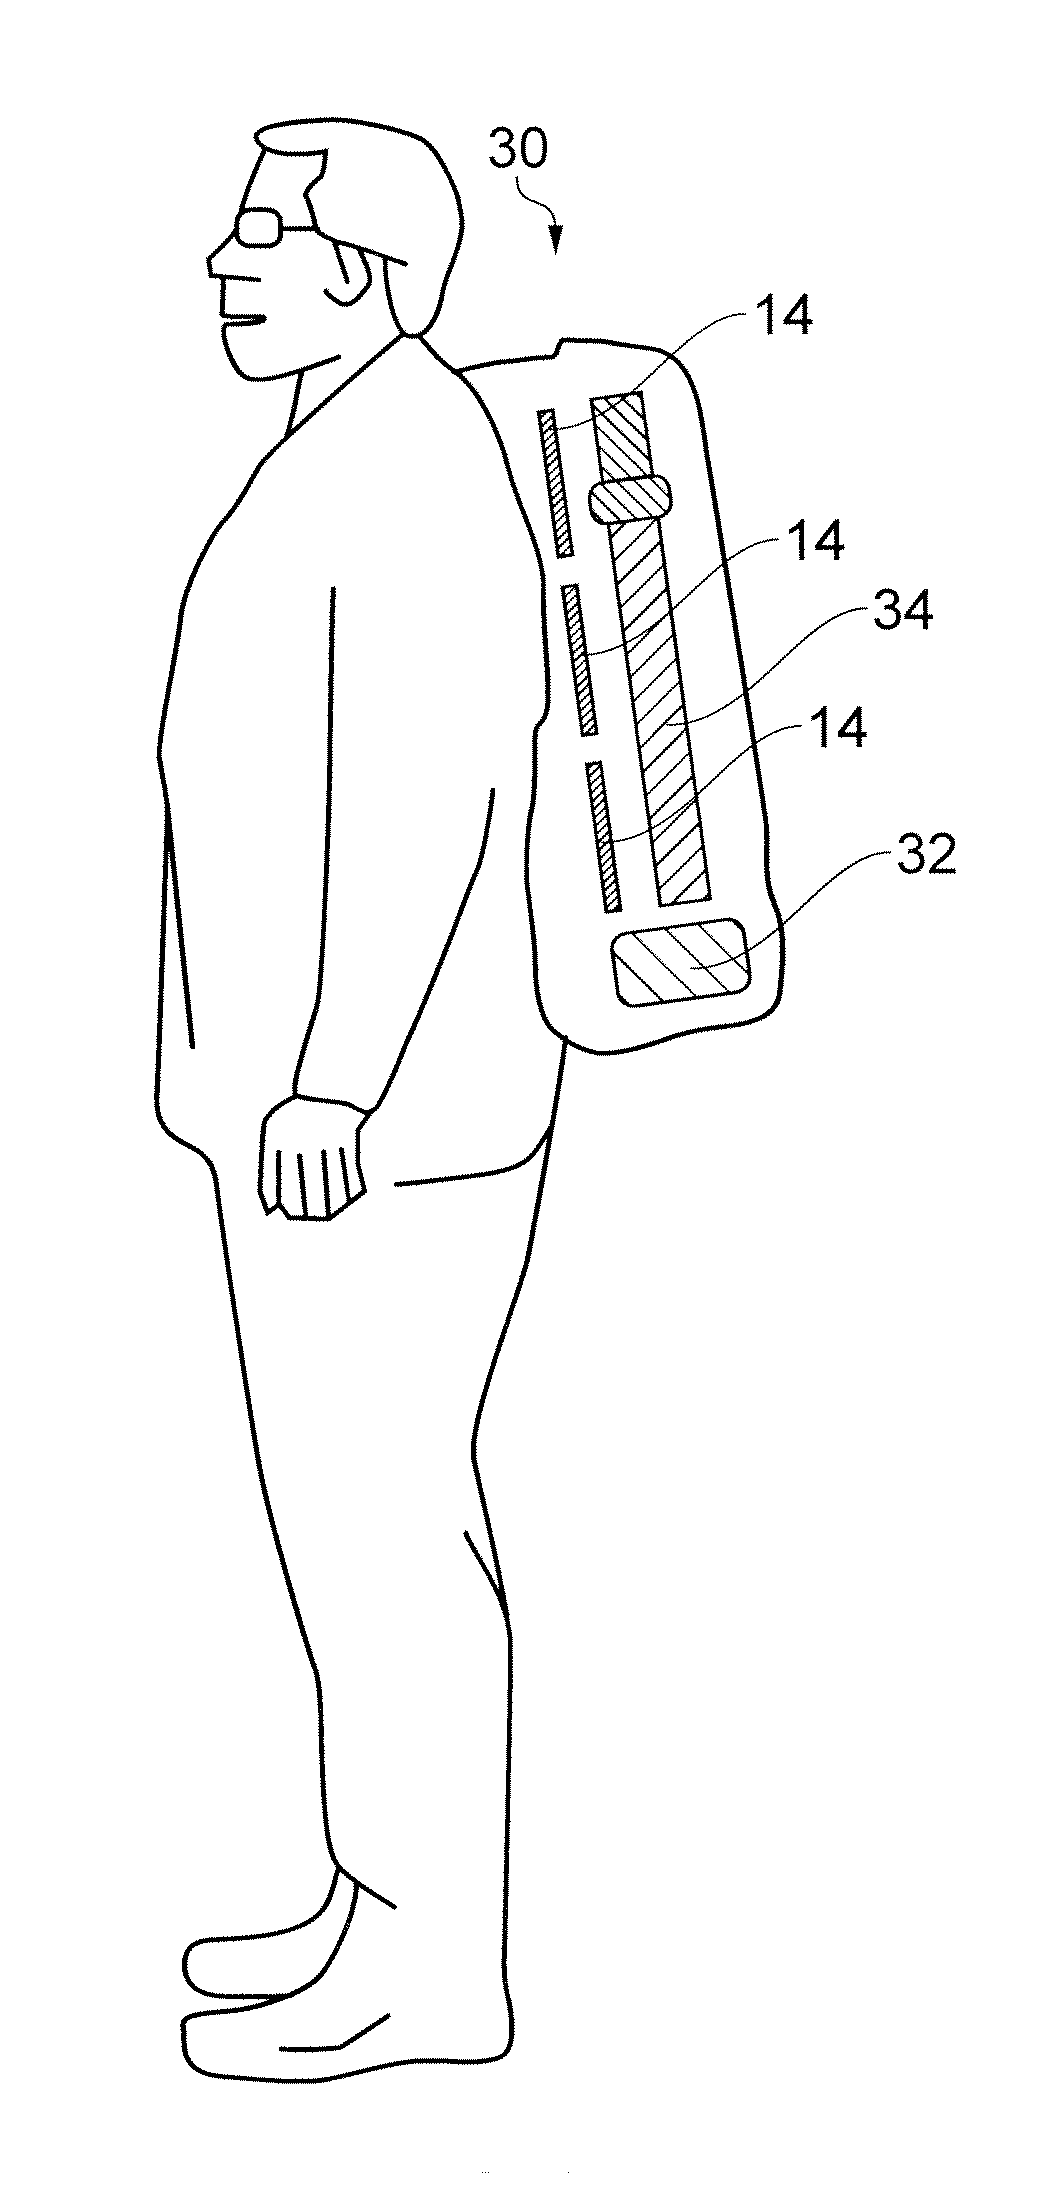 Neutron detector and method for detecting neutrons